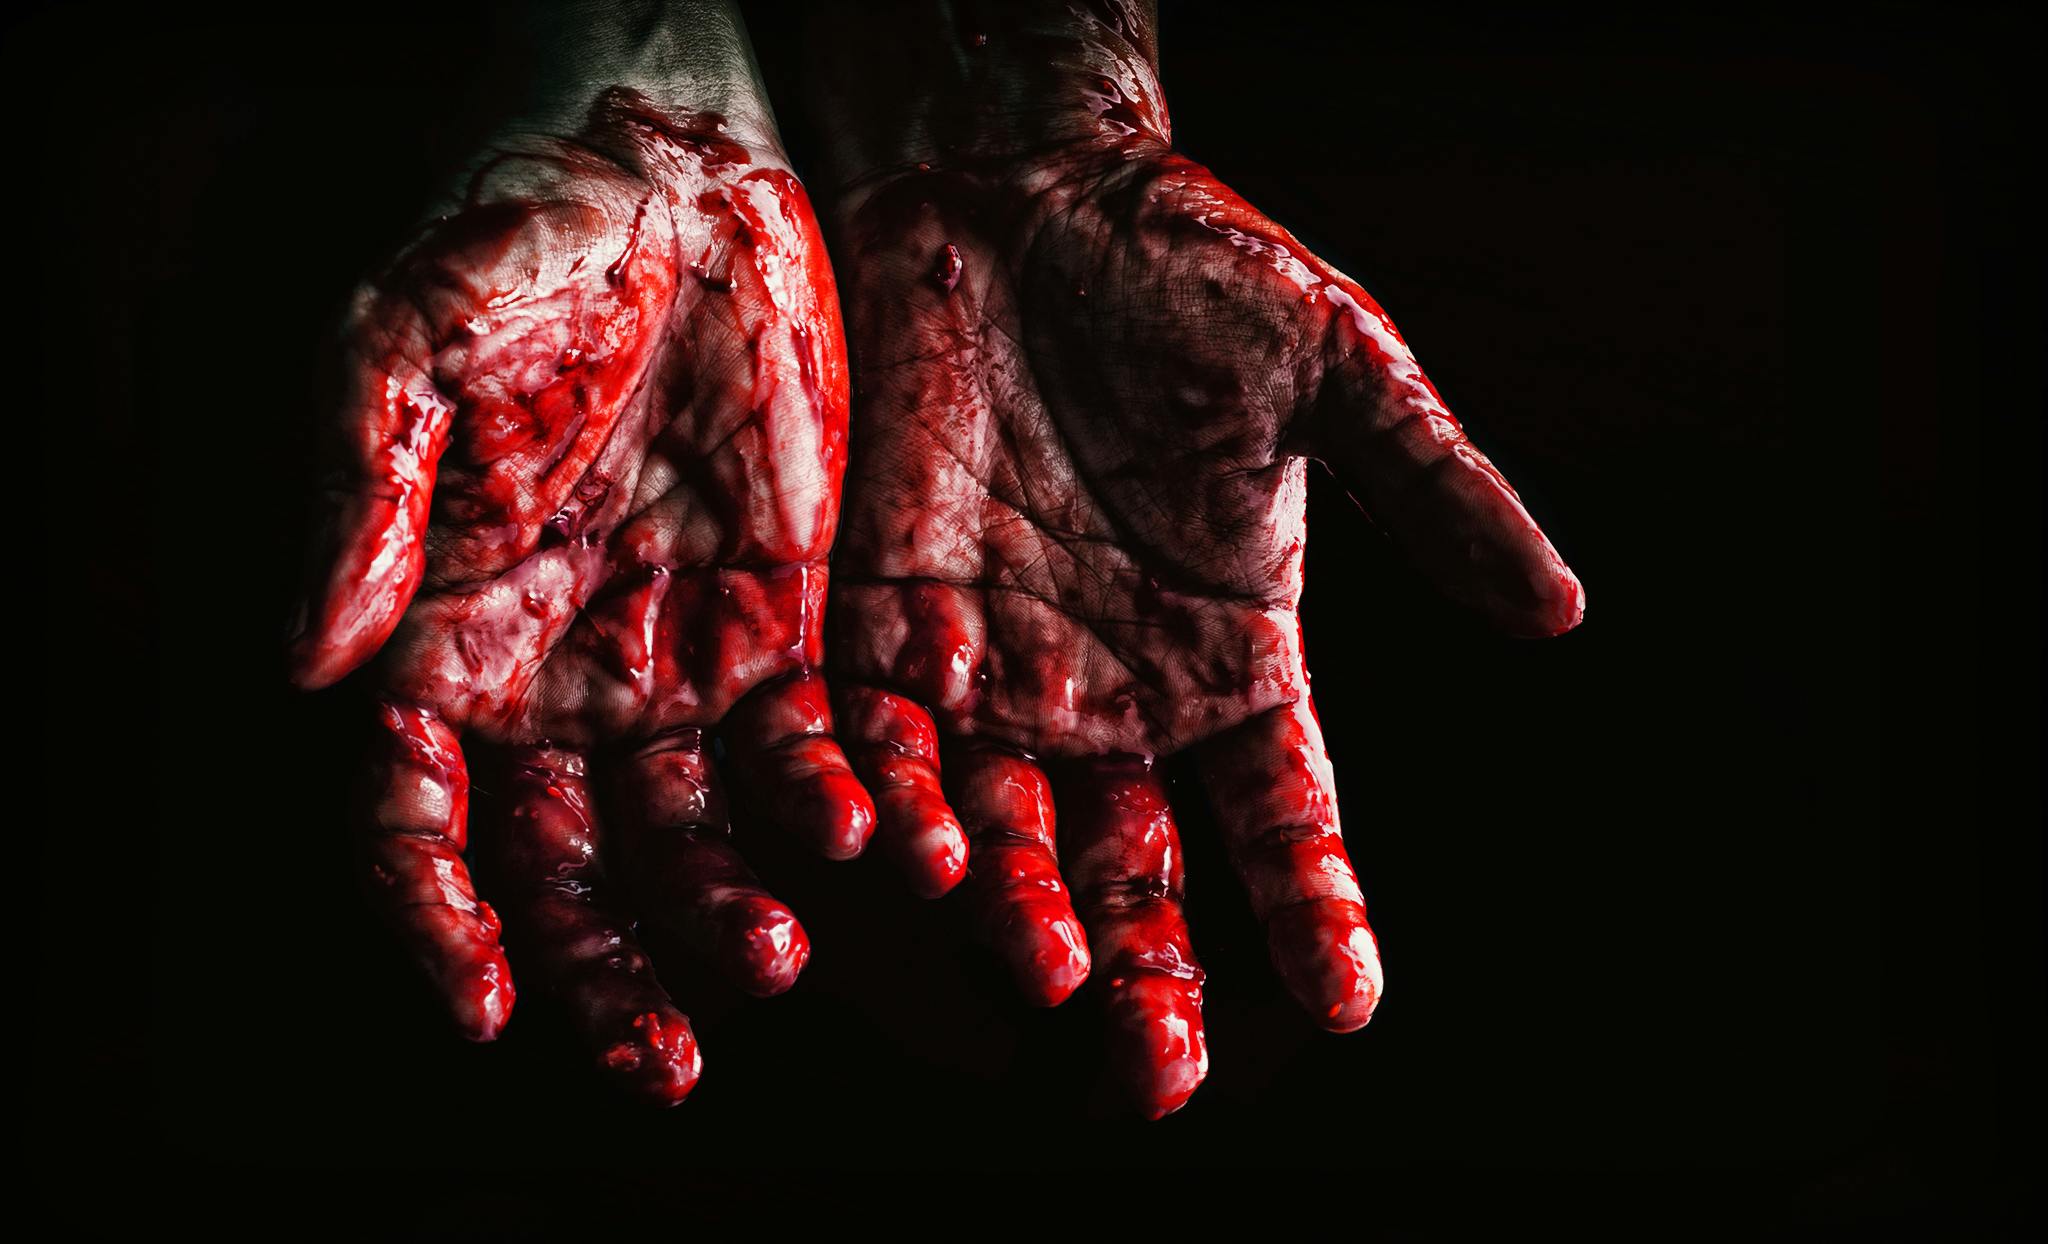 Person's Hands Covered With Blood · Free Stock Photo